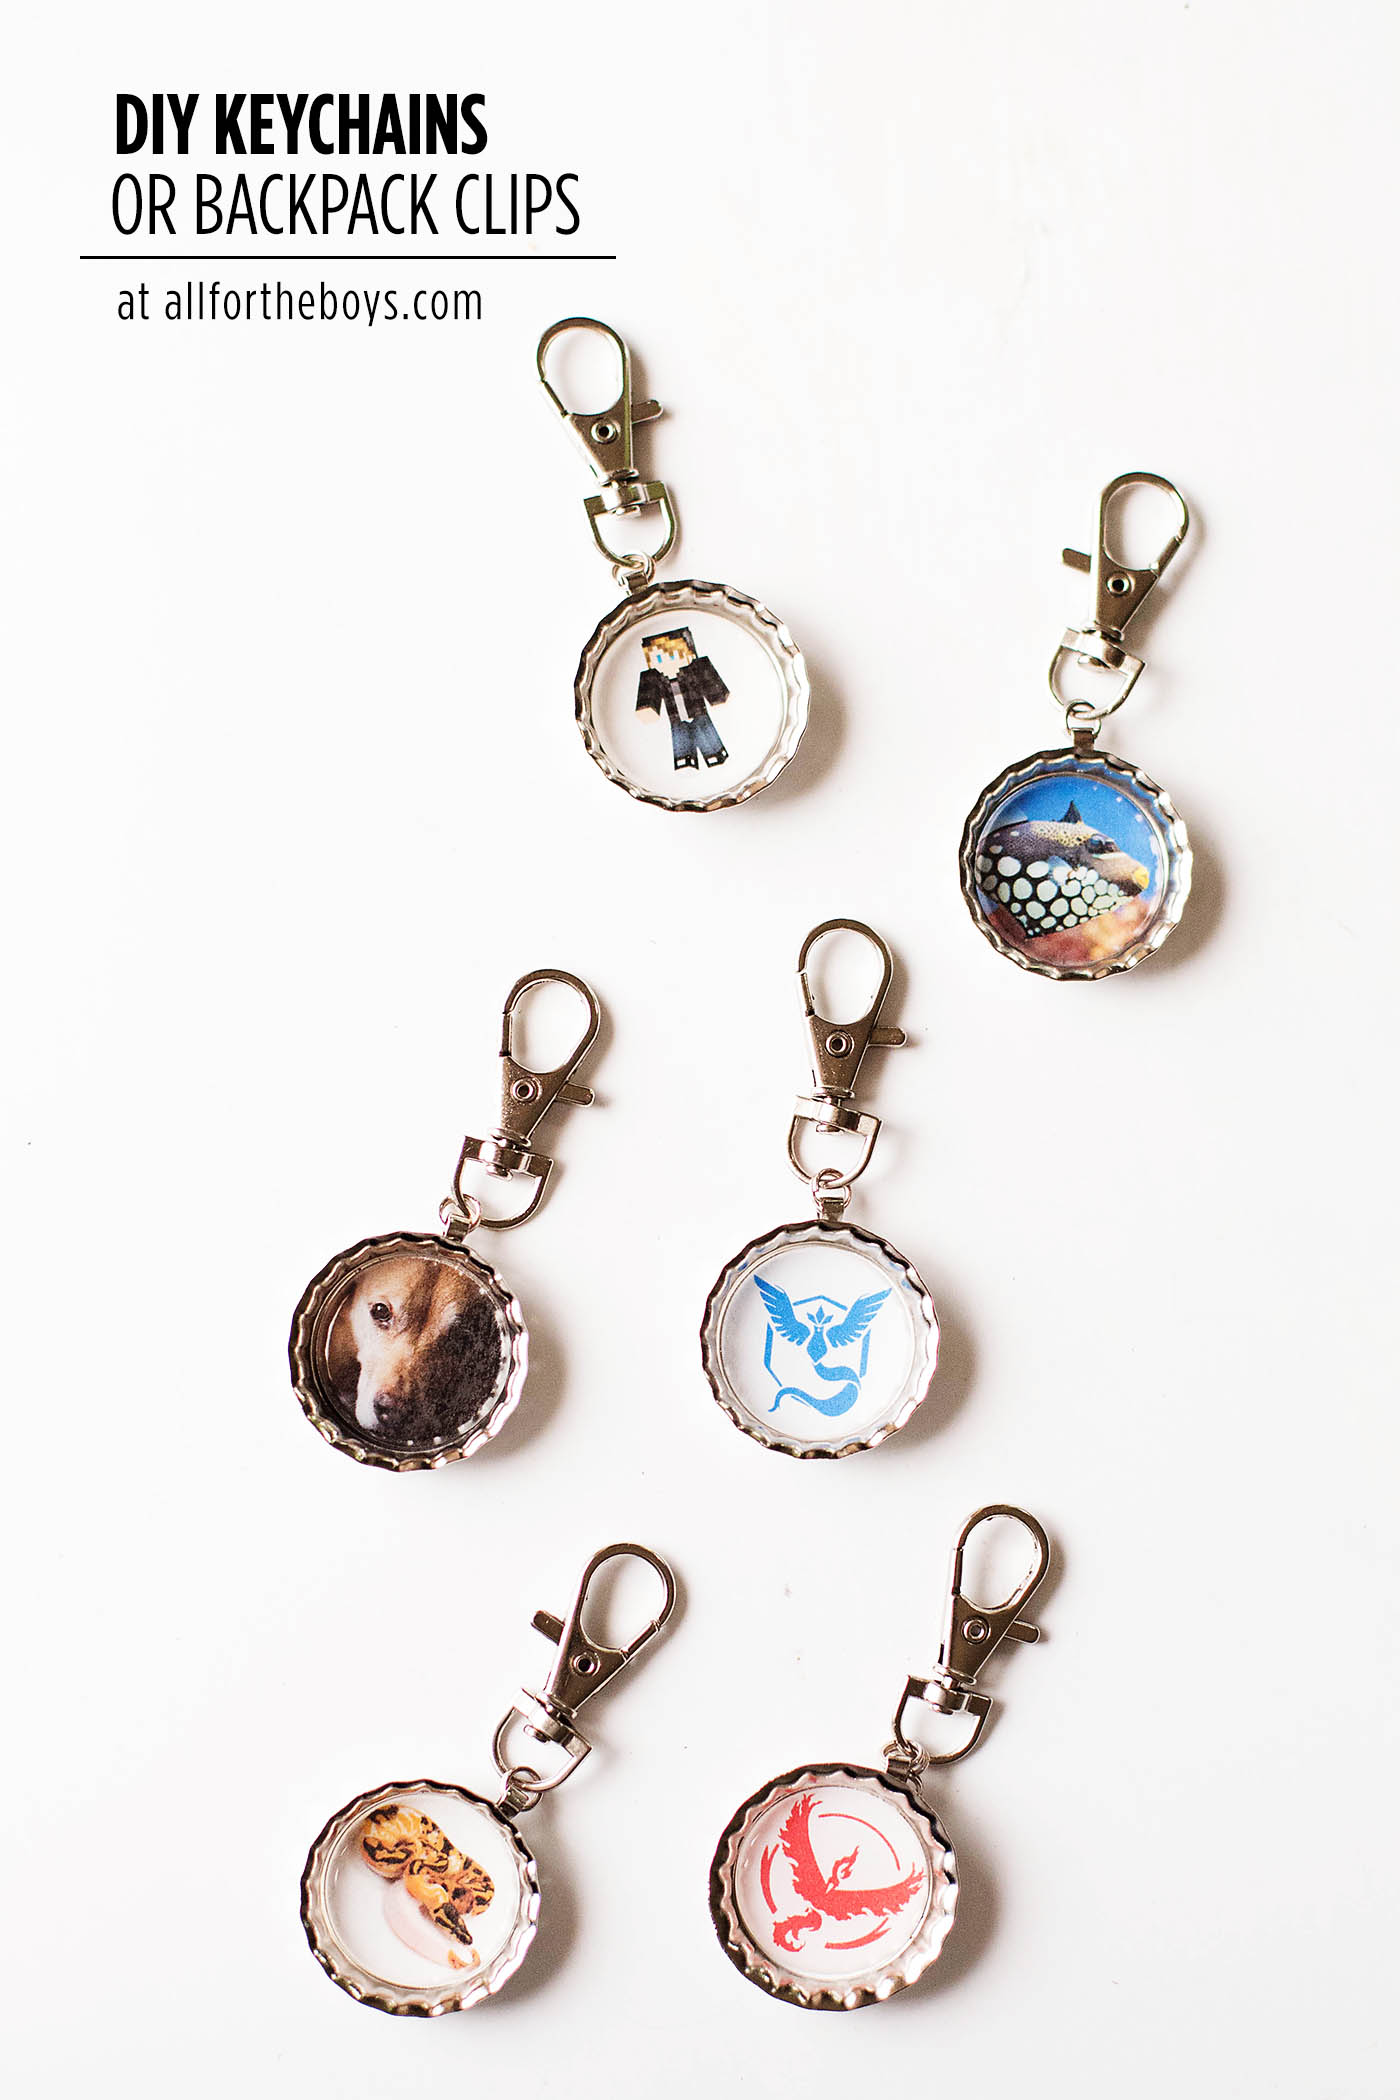 DIY backpack tags or keychains